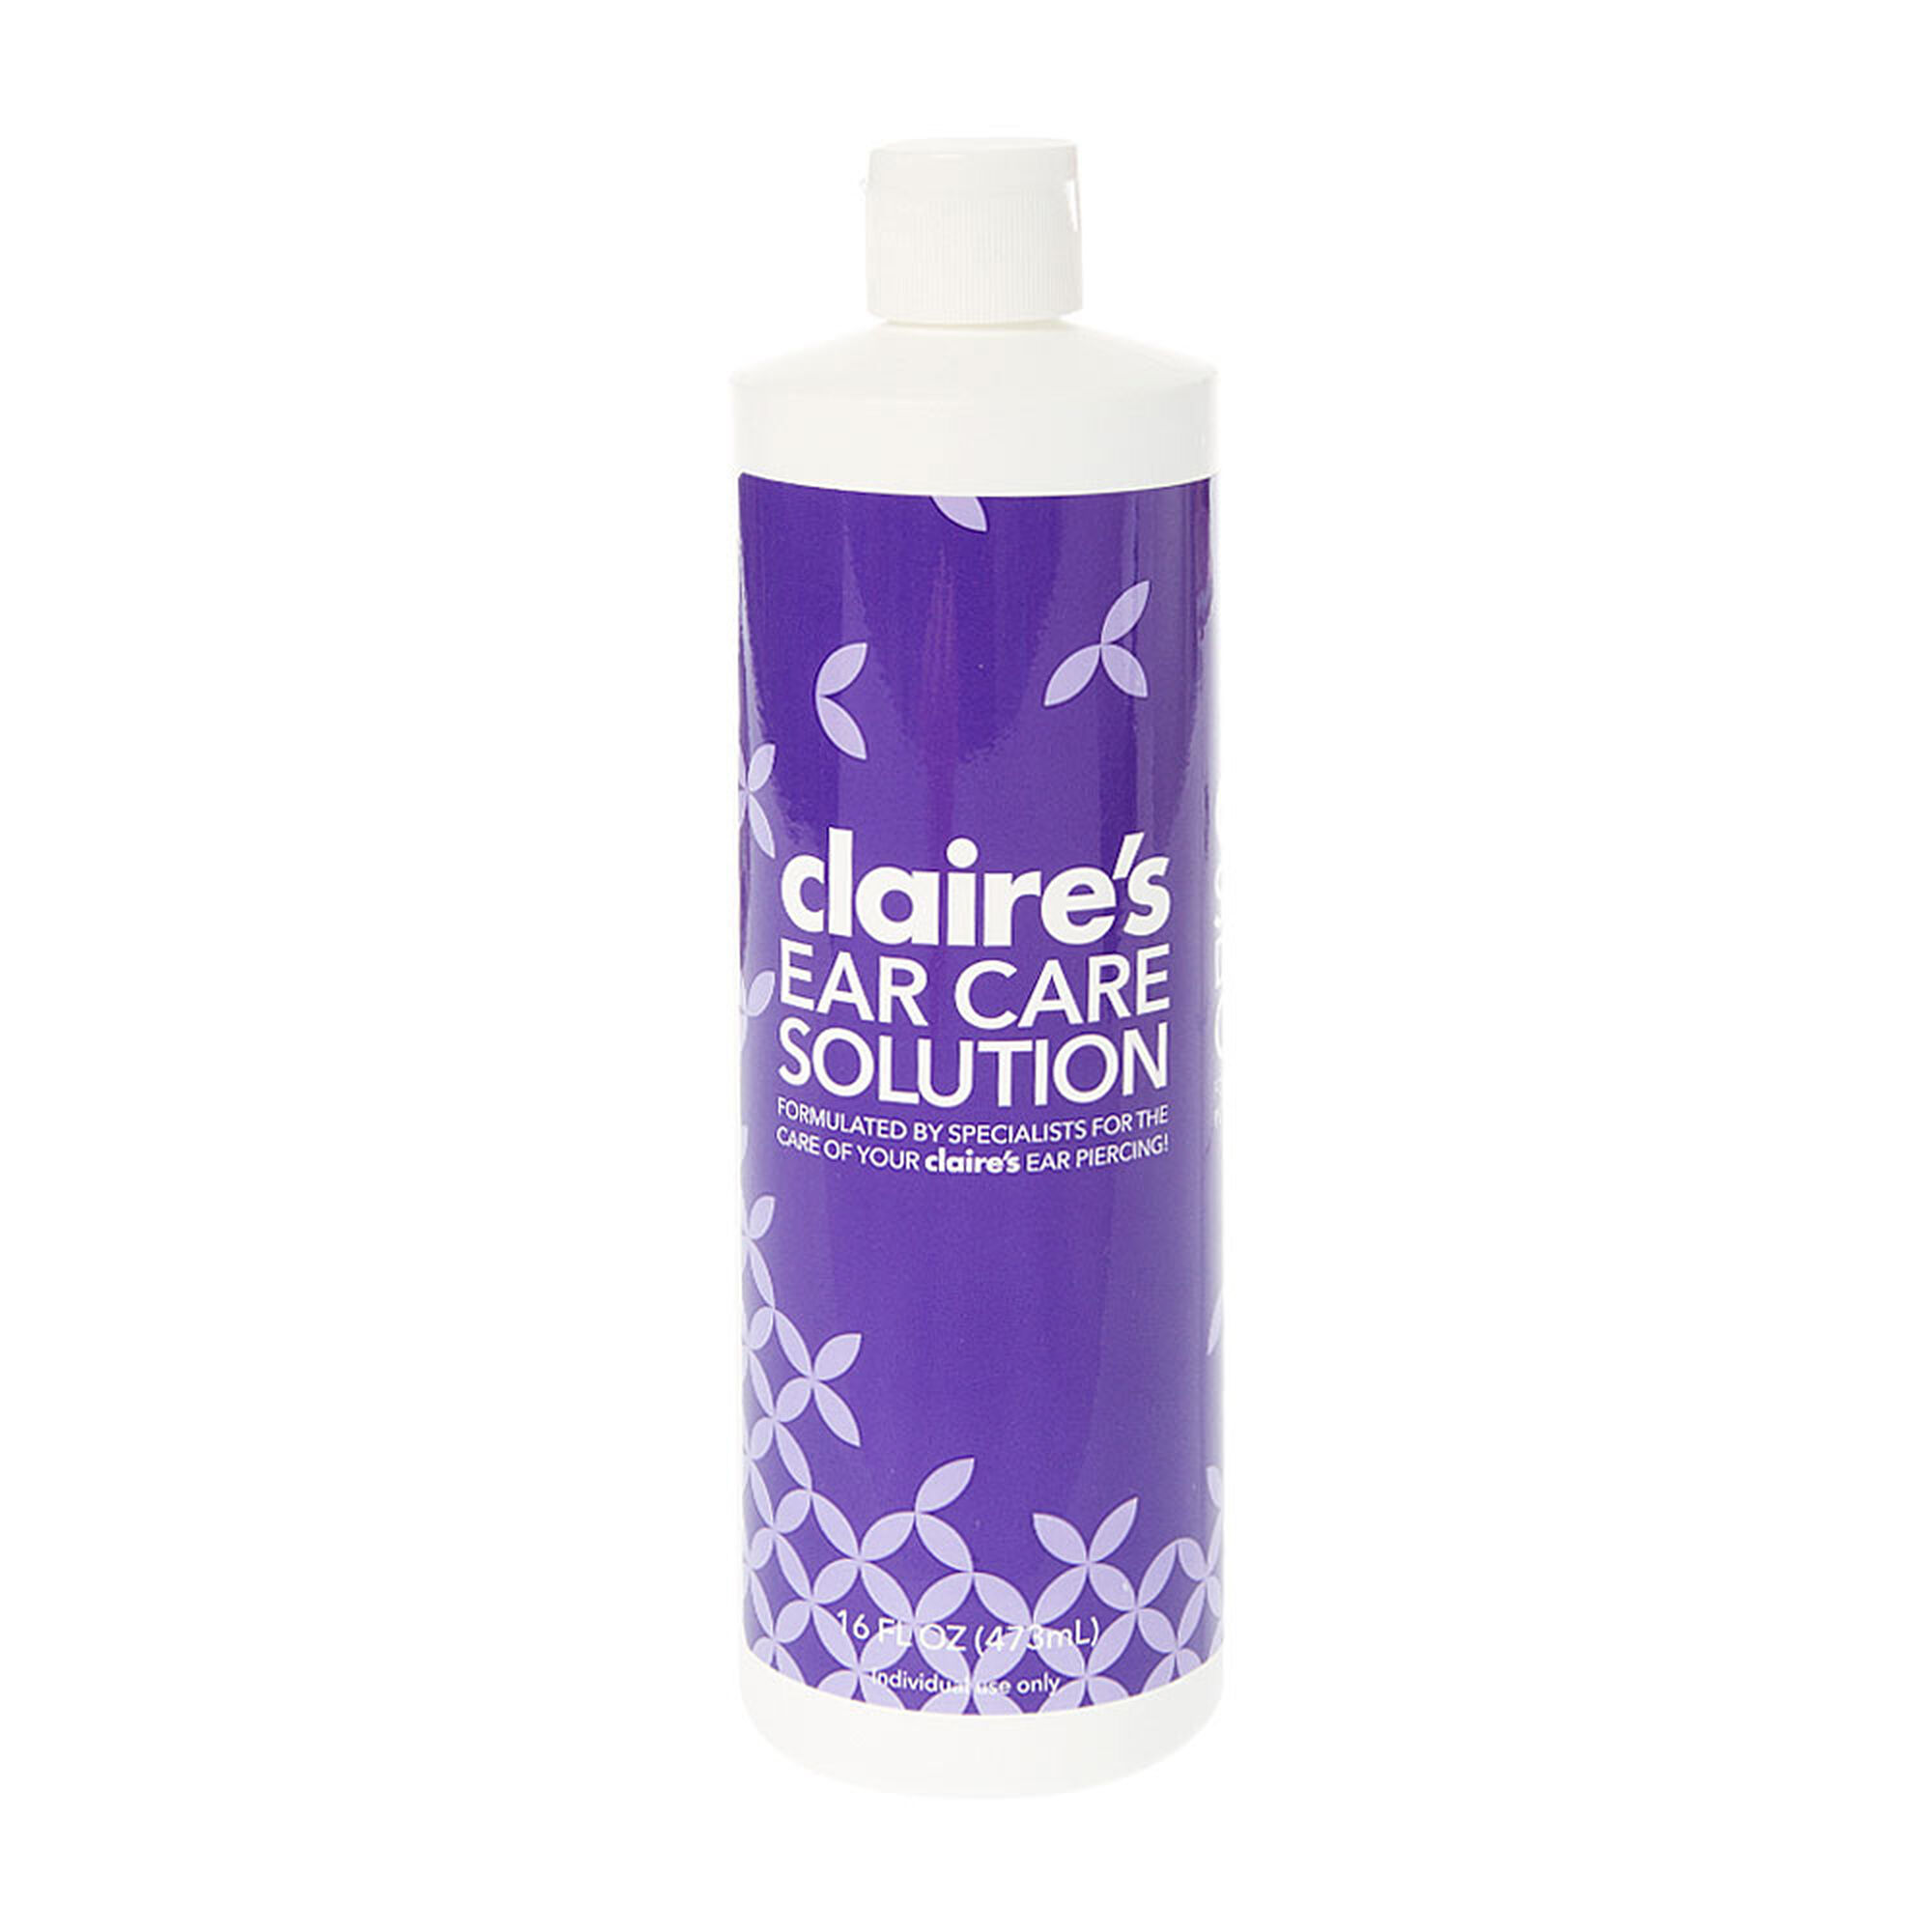 Claire's 3.4 Fl Oz Rapid 3 Week Aftercare Ear Piercing Spray Solution –  Avoid Infections on Pierced Ears, Nose Piercings, and Belly Button  Piercings –